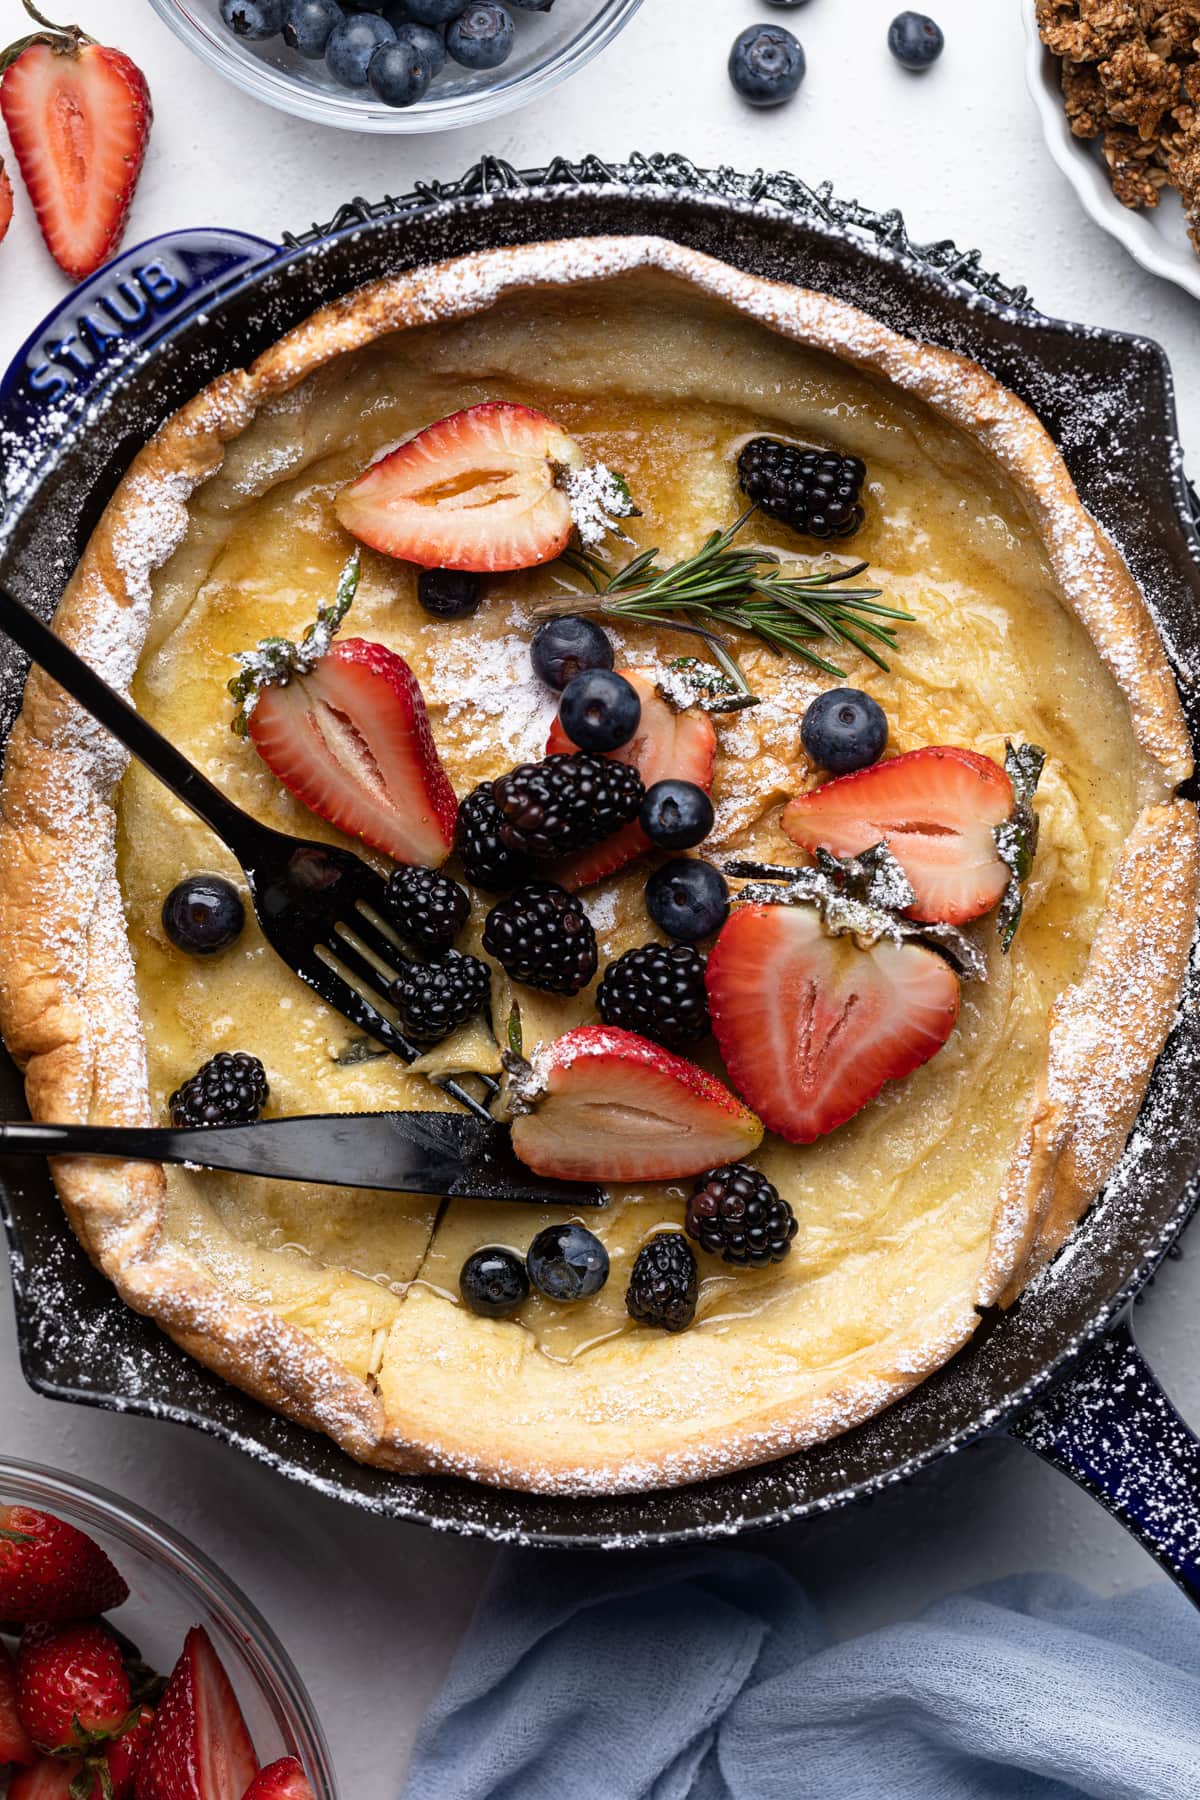 Dutch Baby Pancake with Berries